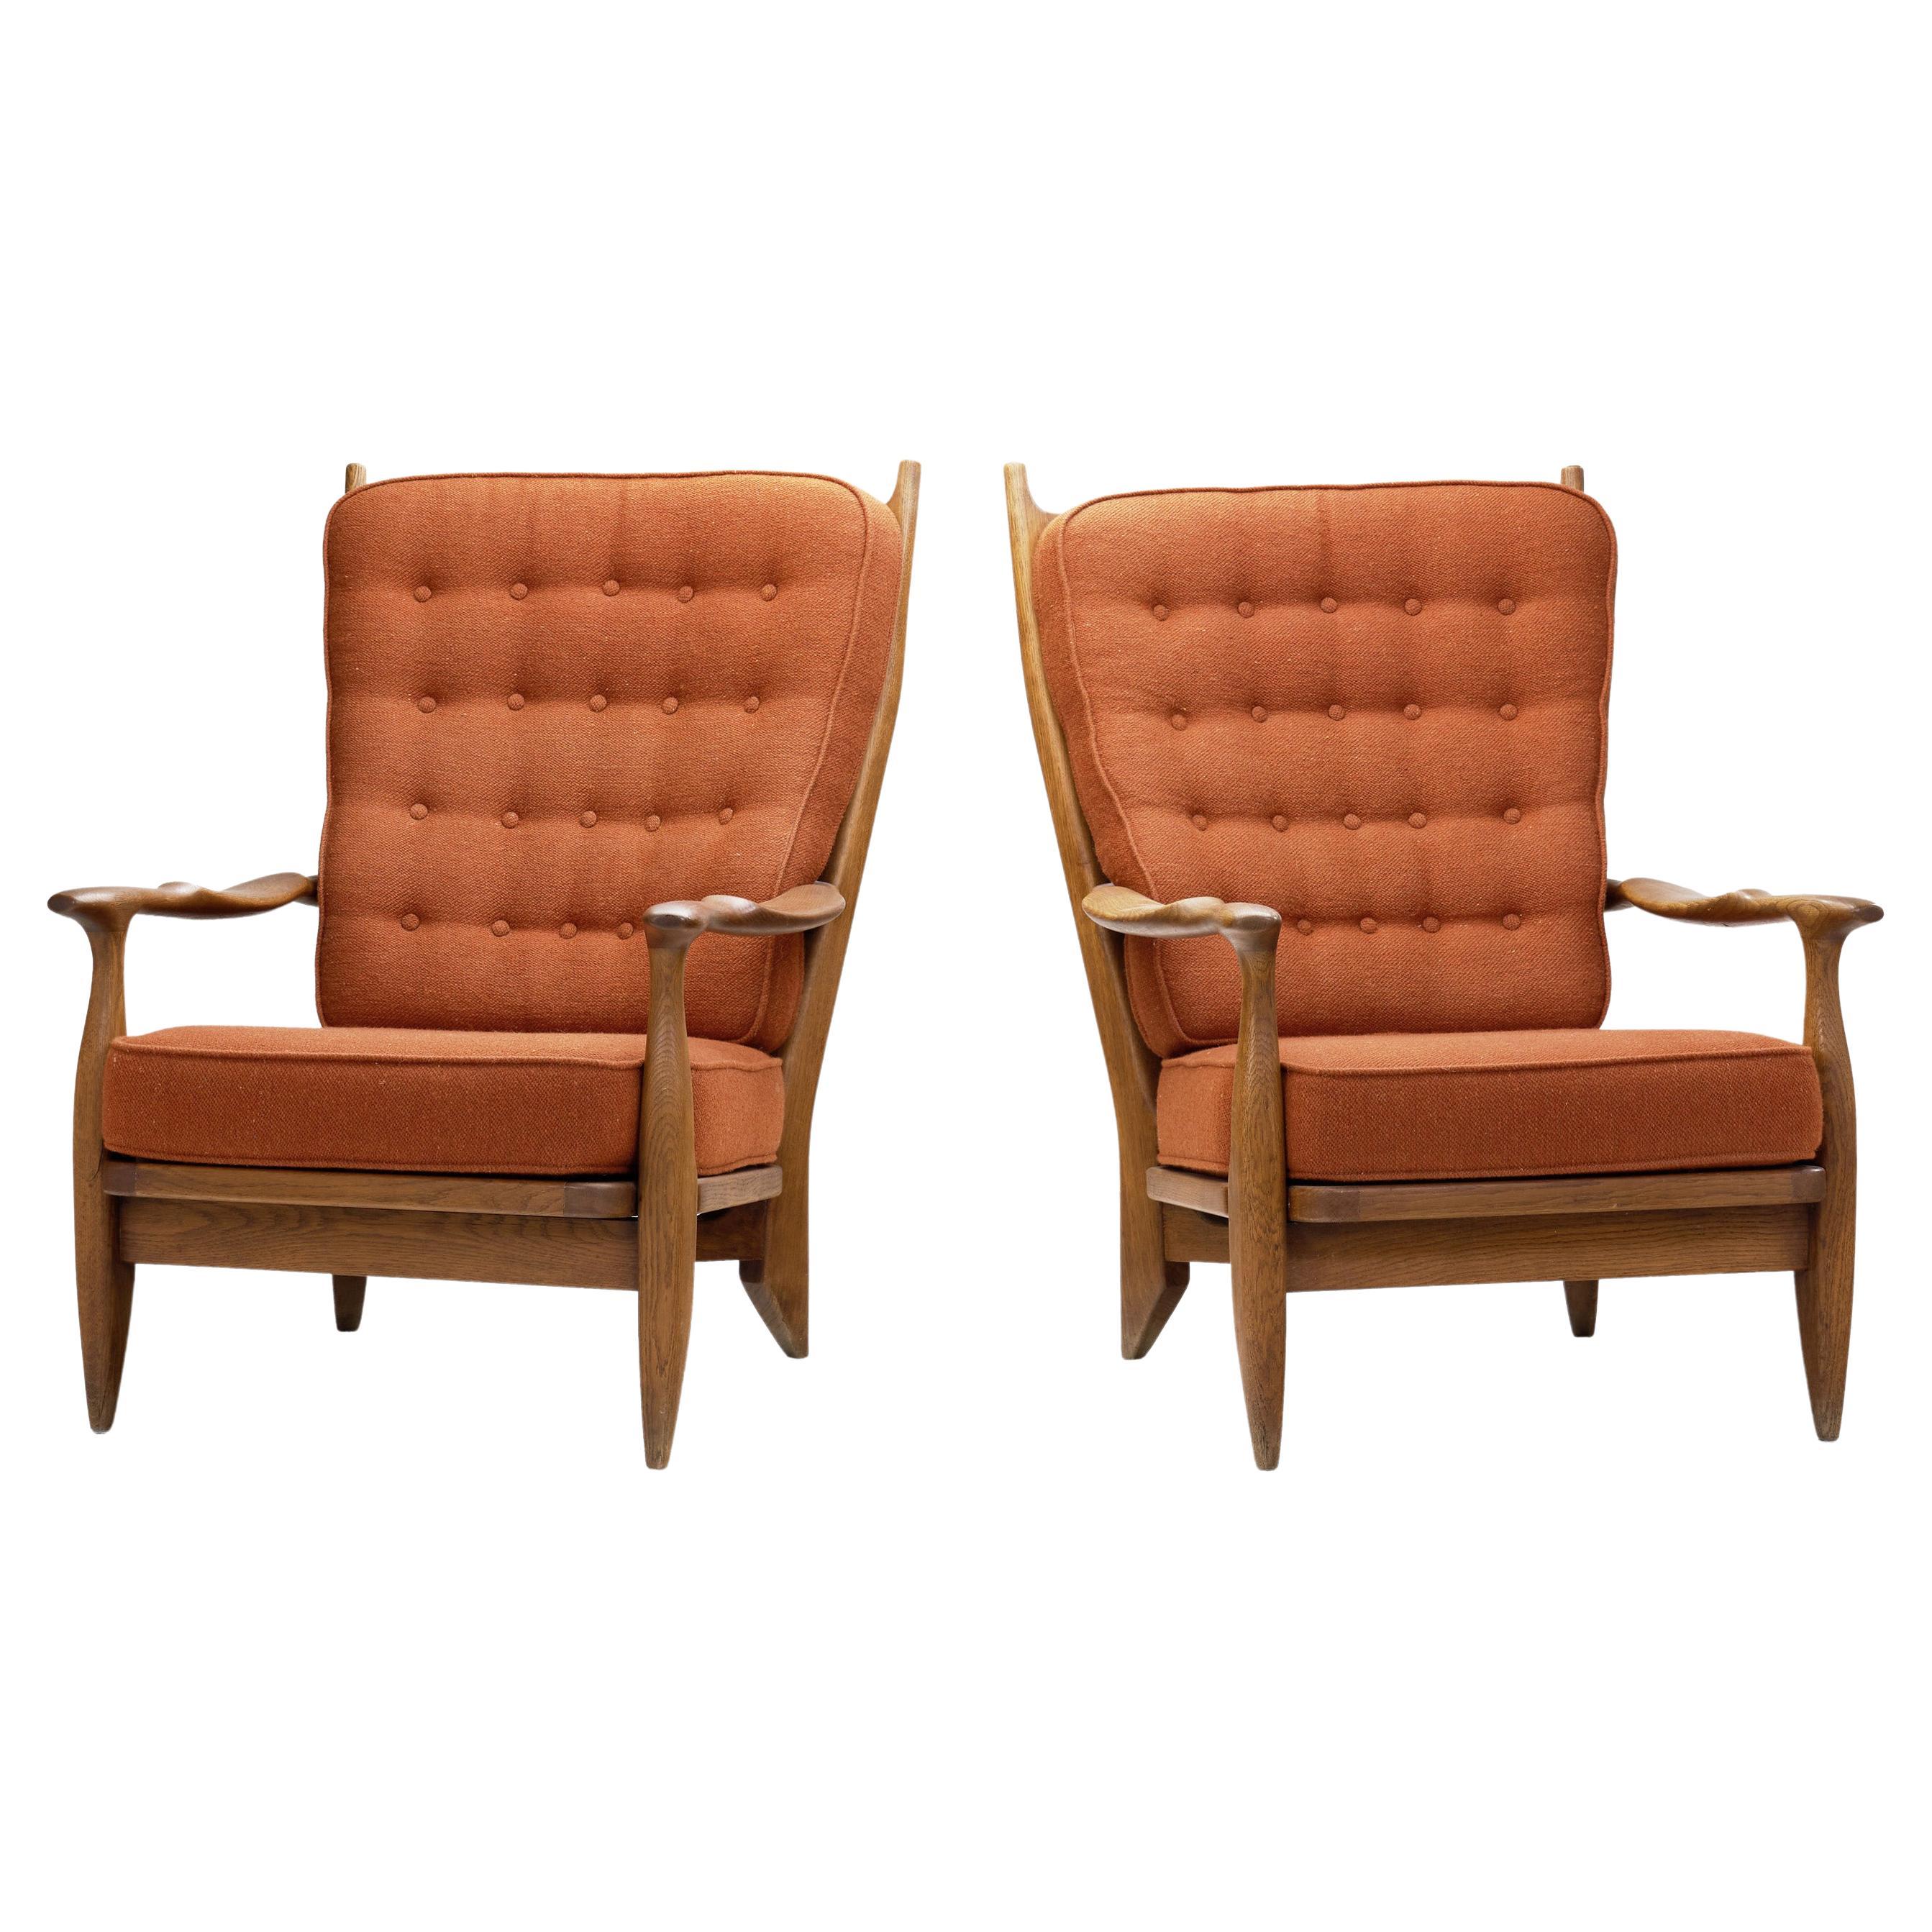 Armchairs with Terra Cotta Fabric by Guillerme and Chambron, France 1960s